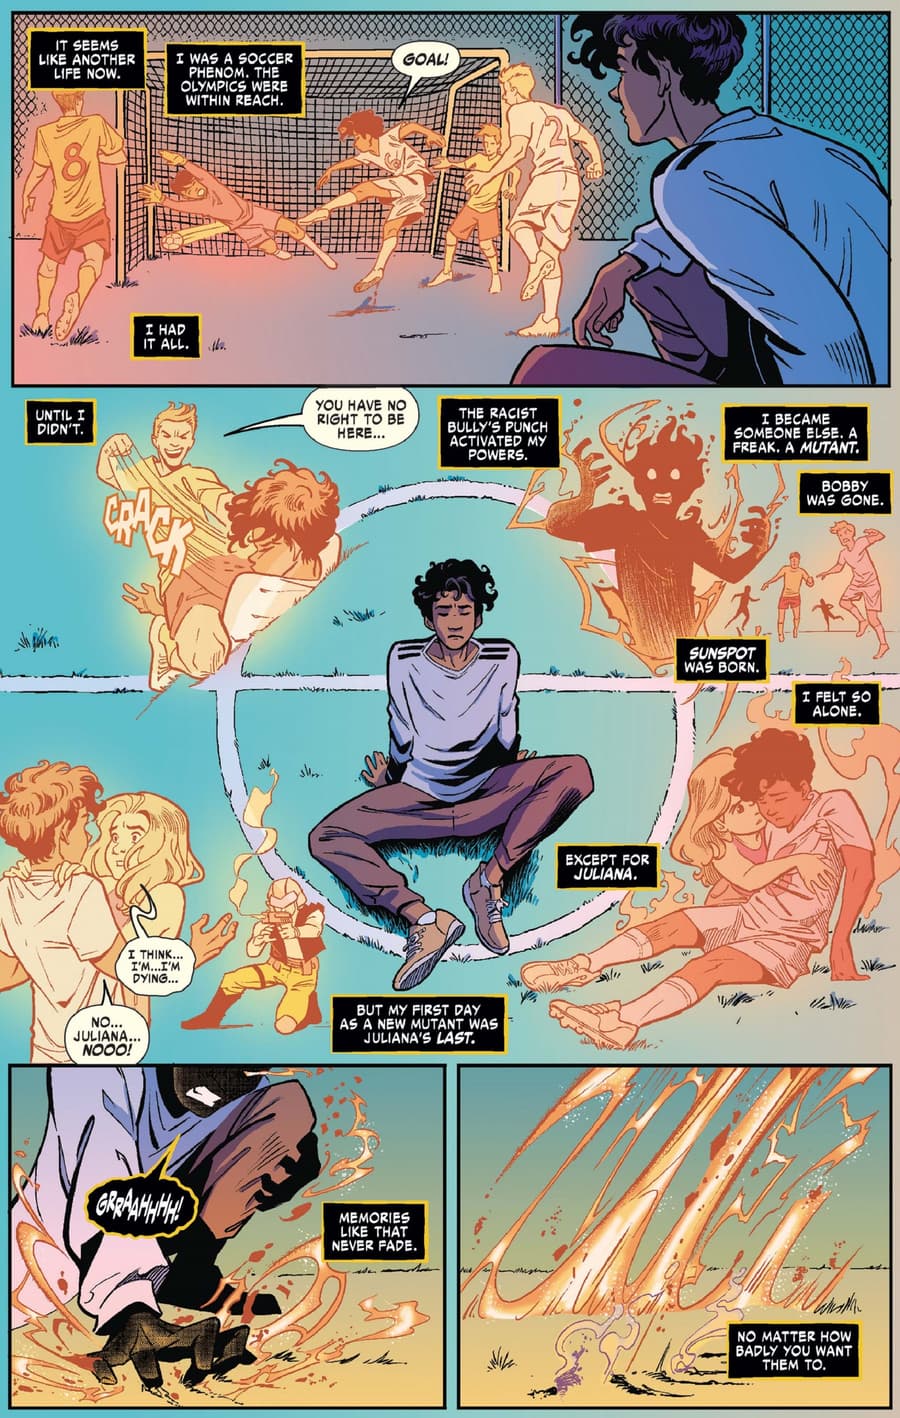 “Homecoming” from MARVEL'S VOICES: COMUNIDADES (2021) #1 by Segura, Alba Glez, and Cris Peter.